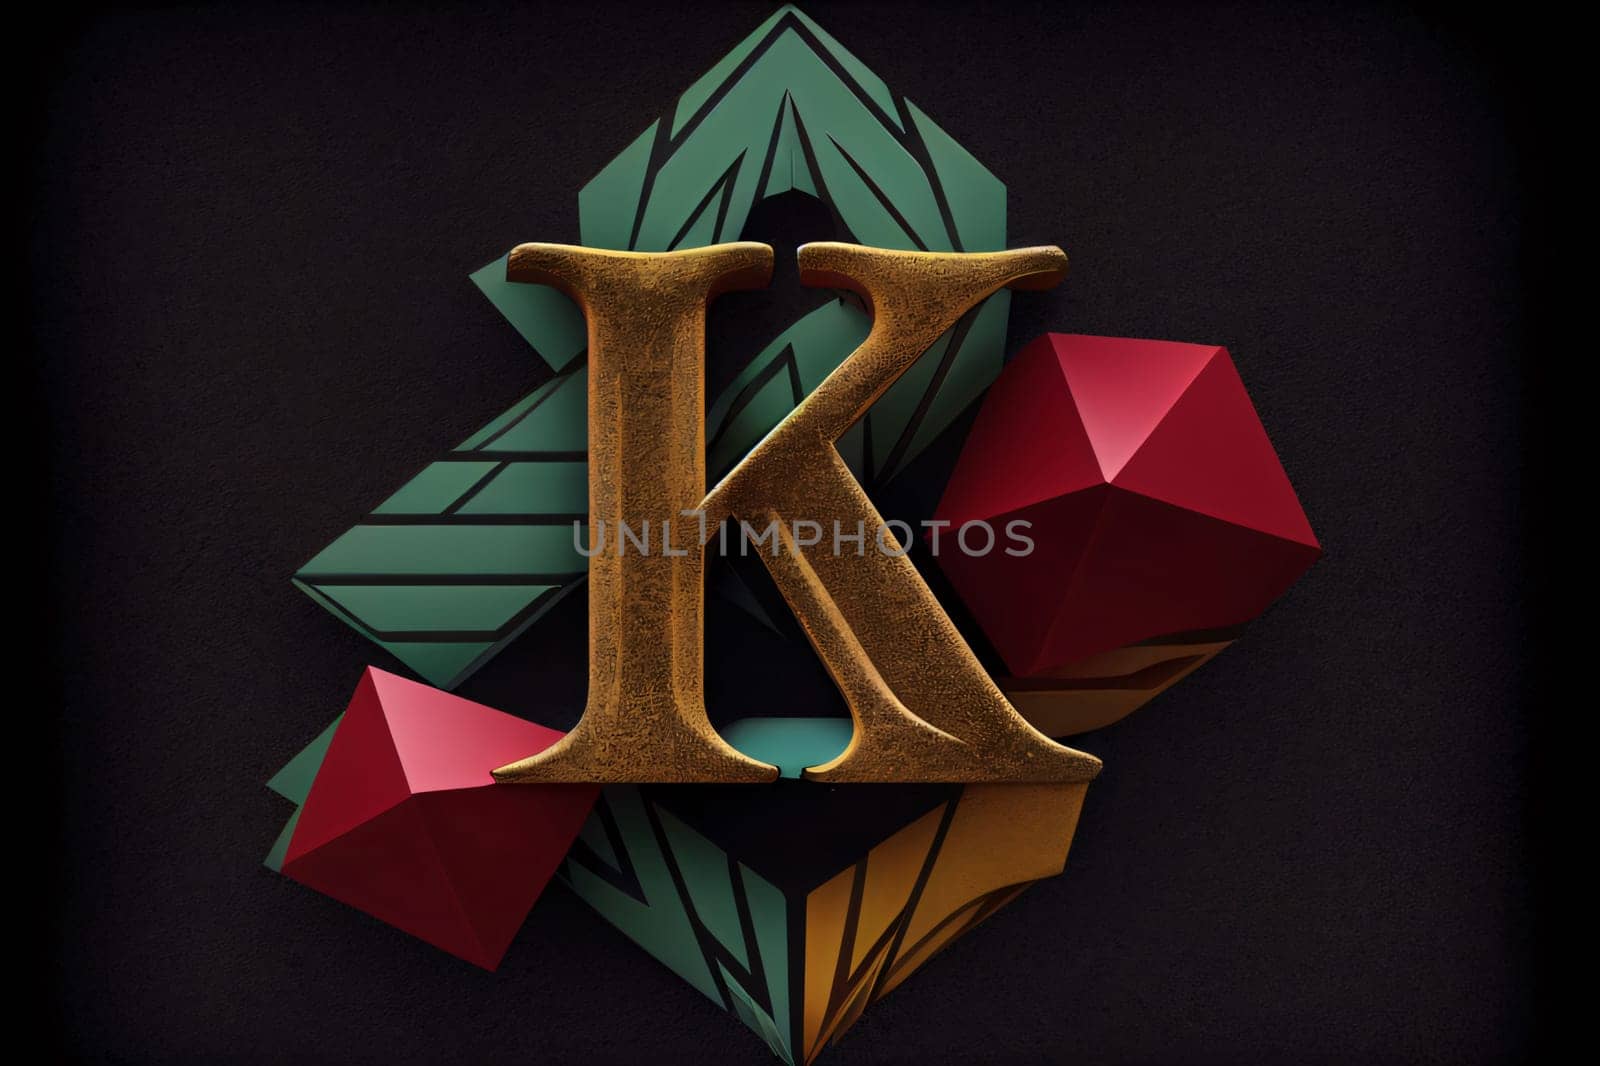 Graphic alphabet letters: Golden letter K decorated with colorful geometric figures on black background. 3D rendering.